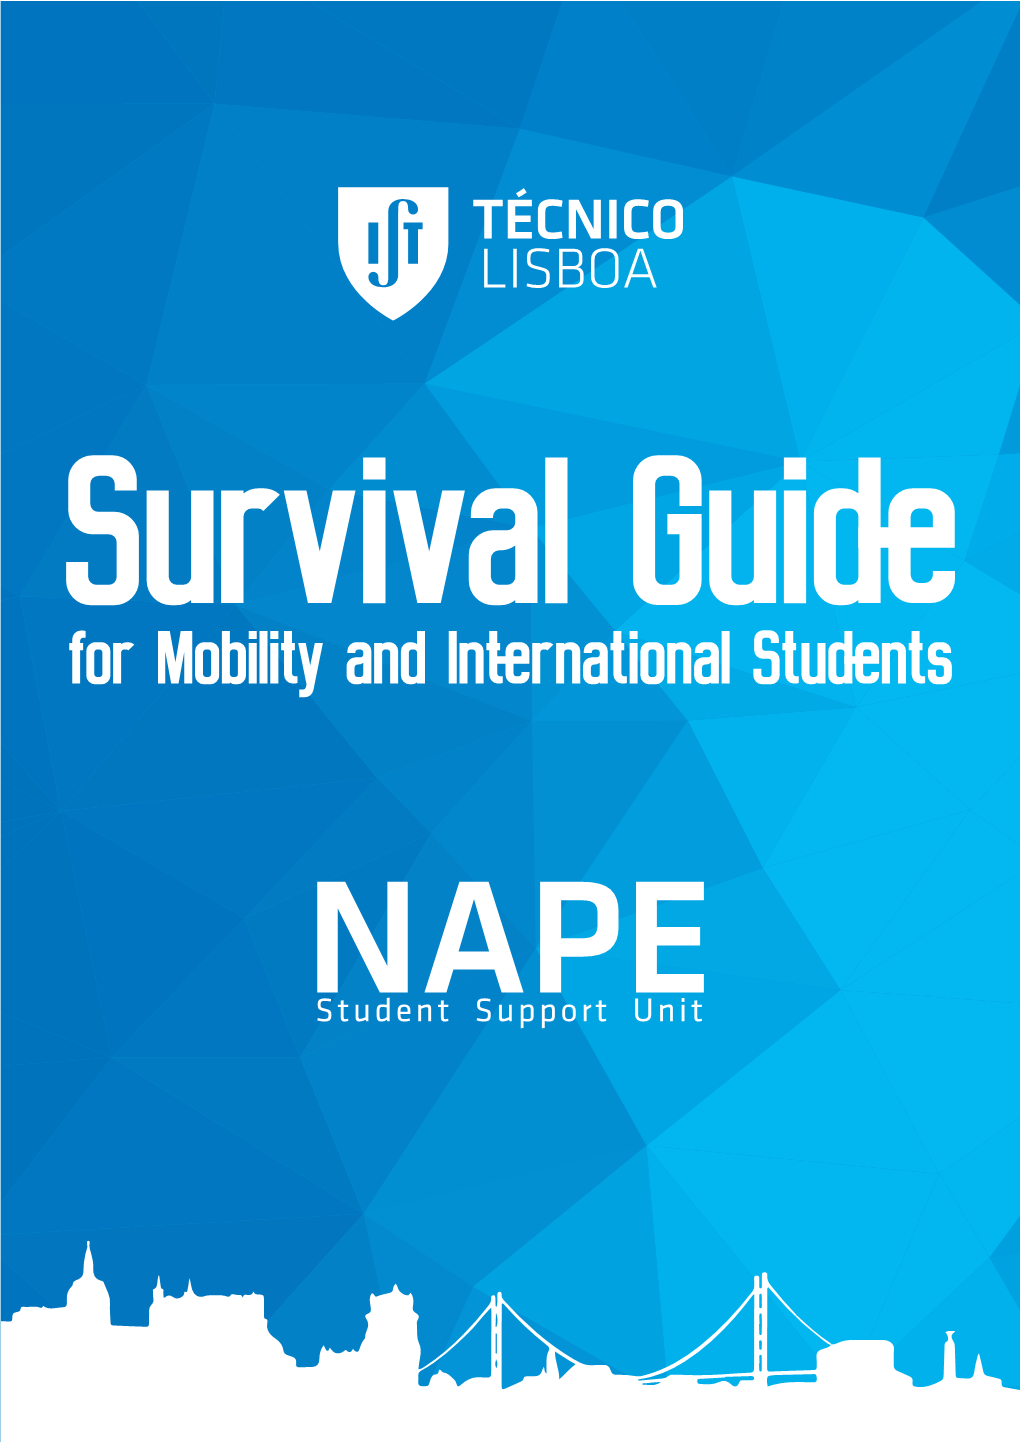 Survival Guide for Mobility and International Students Hi Everyone!